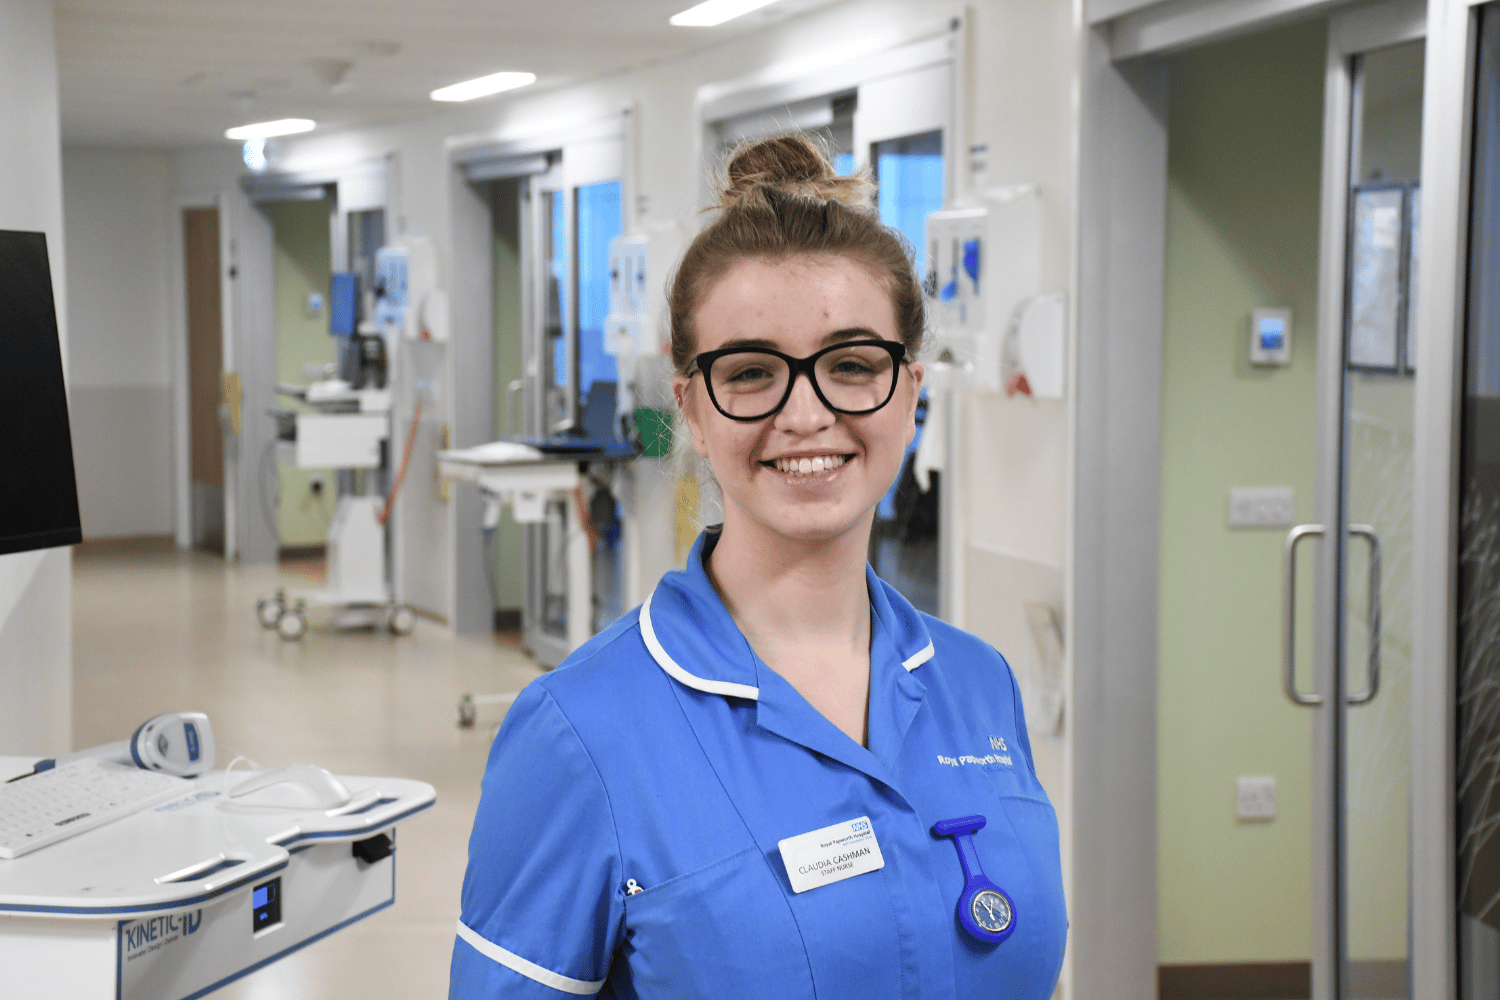 Claudia, wearing a blue nurse uniform and black spectacles, smiling in a hospital ward corridor.